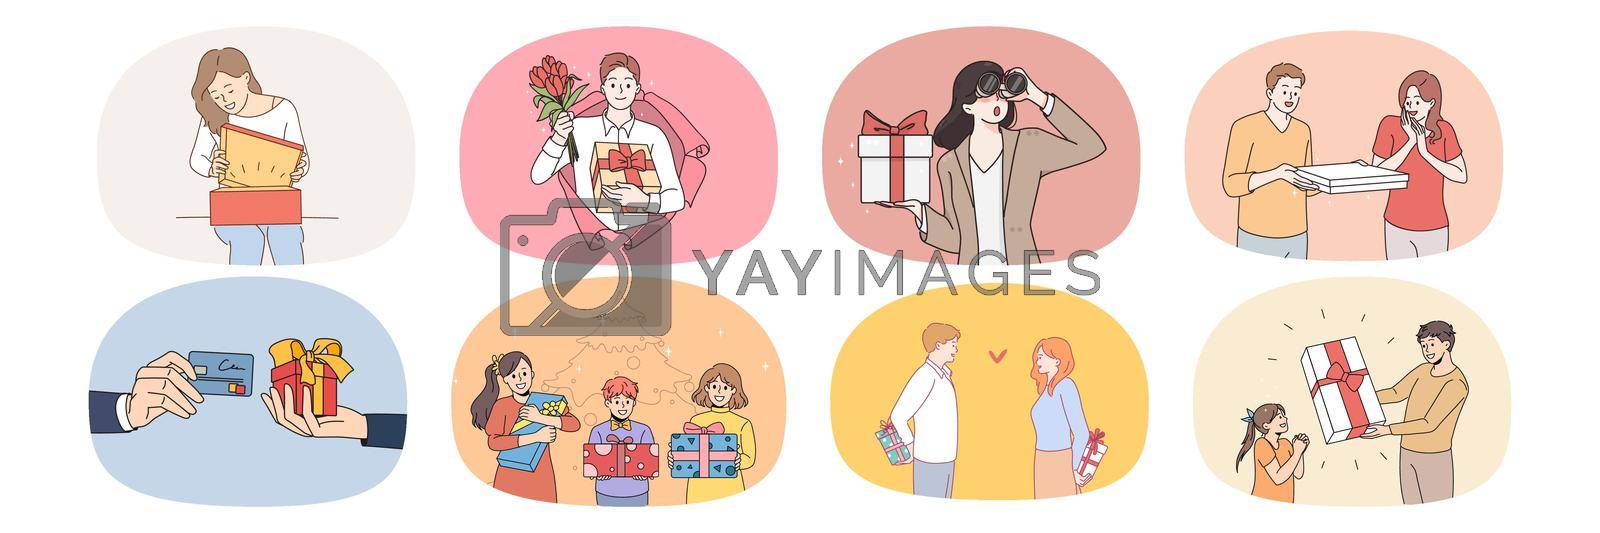 Collection of overjoyed man and woman feel excited with present surprise. Set of diverse people get gift on birthday or anniversary. Concept of greeting and celebration. Flat vector illustration.